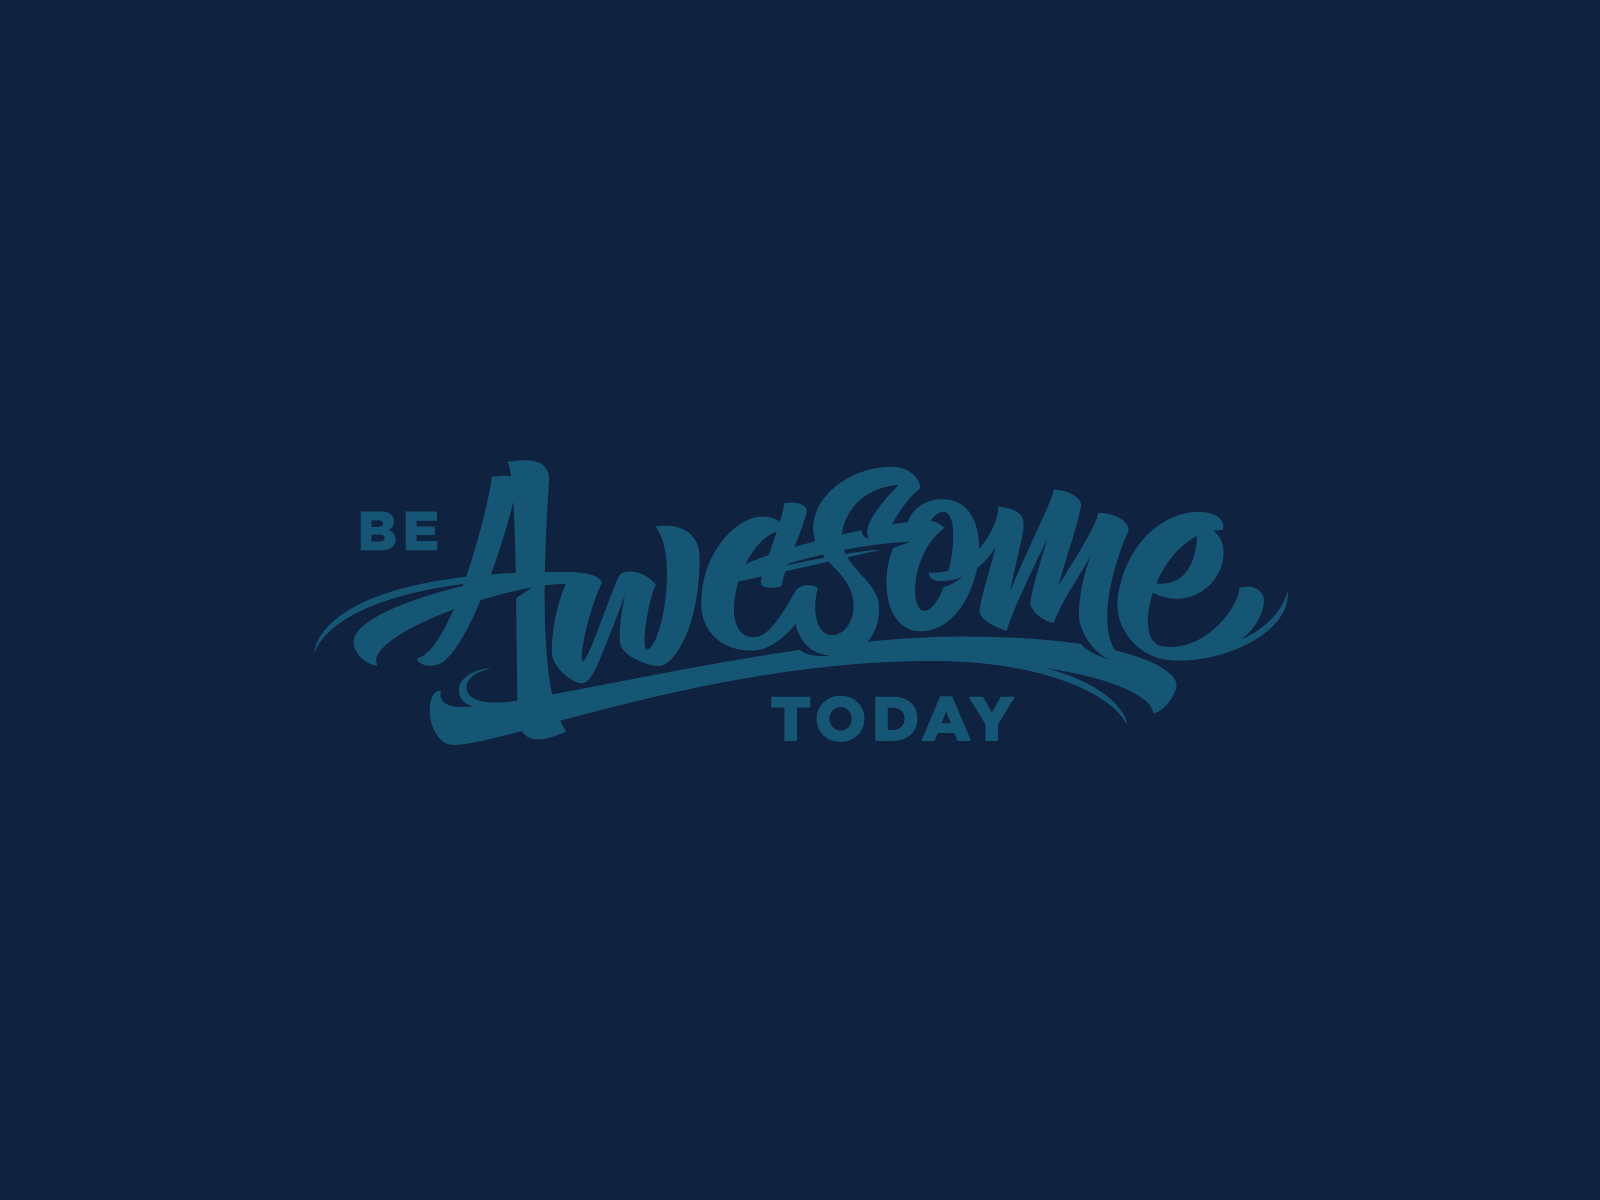  Today, be awesome—and everyday after.&nbsp; 